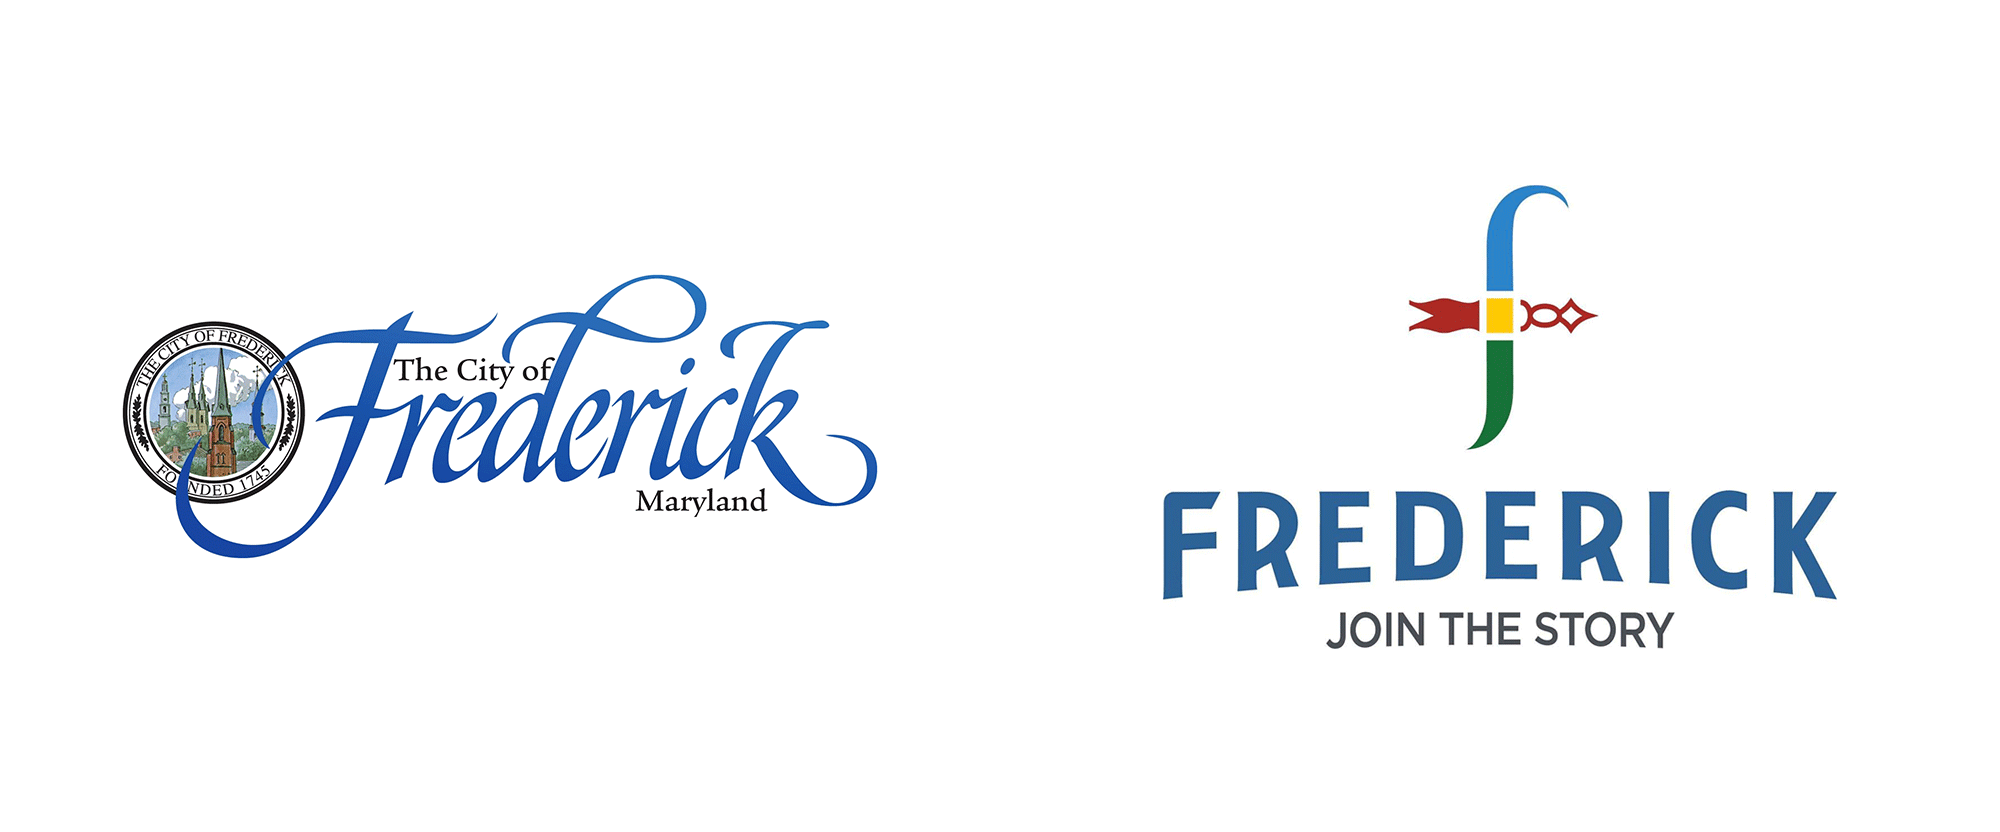 New Logo for City of Frederick by North Star